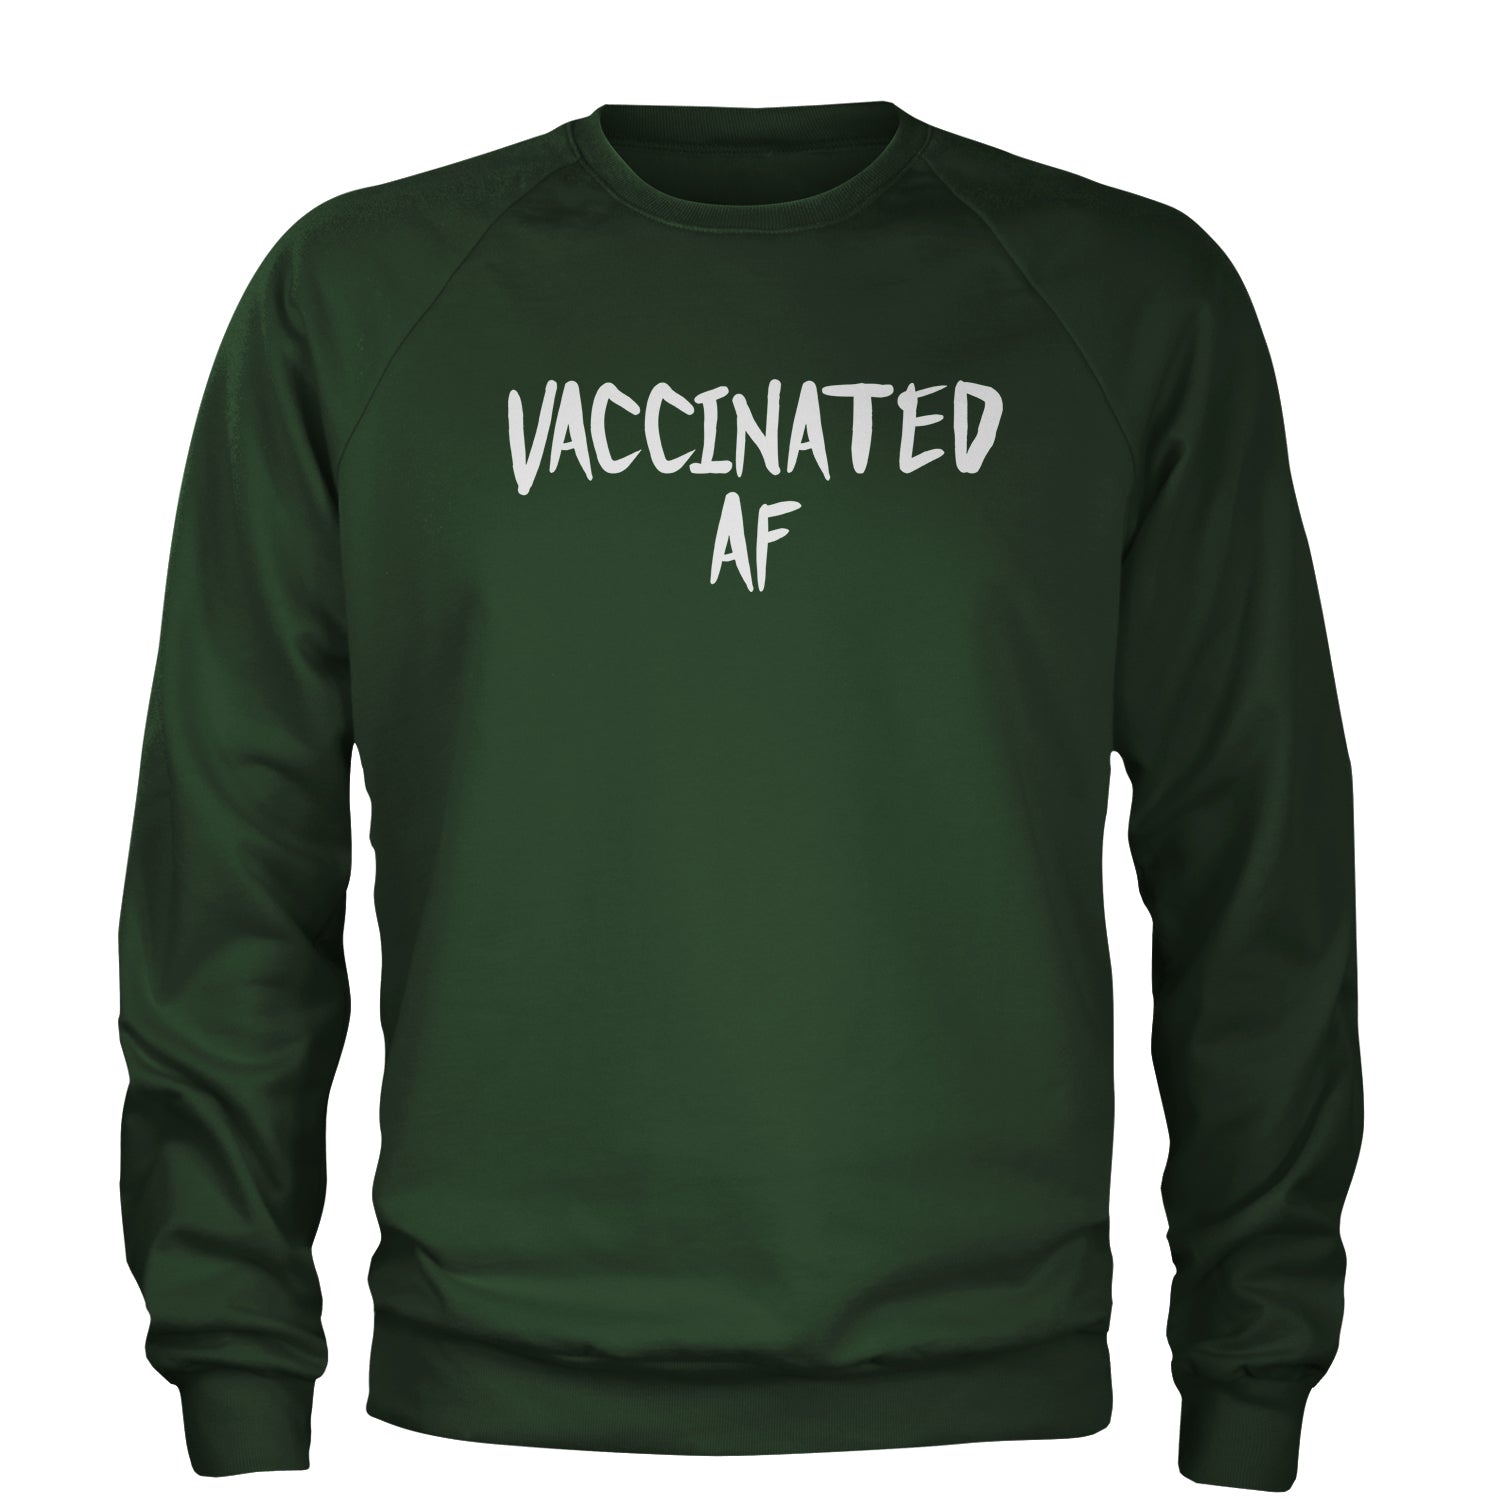 Vaccinated AF Pro Vaccine Funny Vaccination Health Adult Crewneck Sweatshirt moderna, pfizer, vaccine, vax, vaxx by Expression Tees